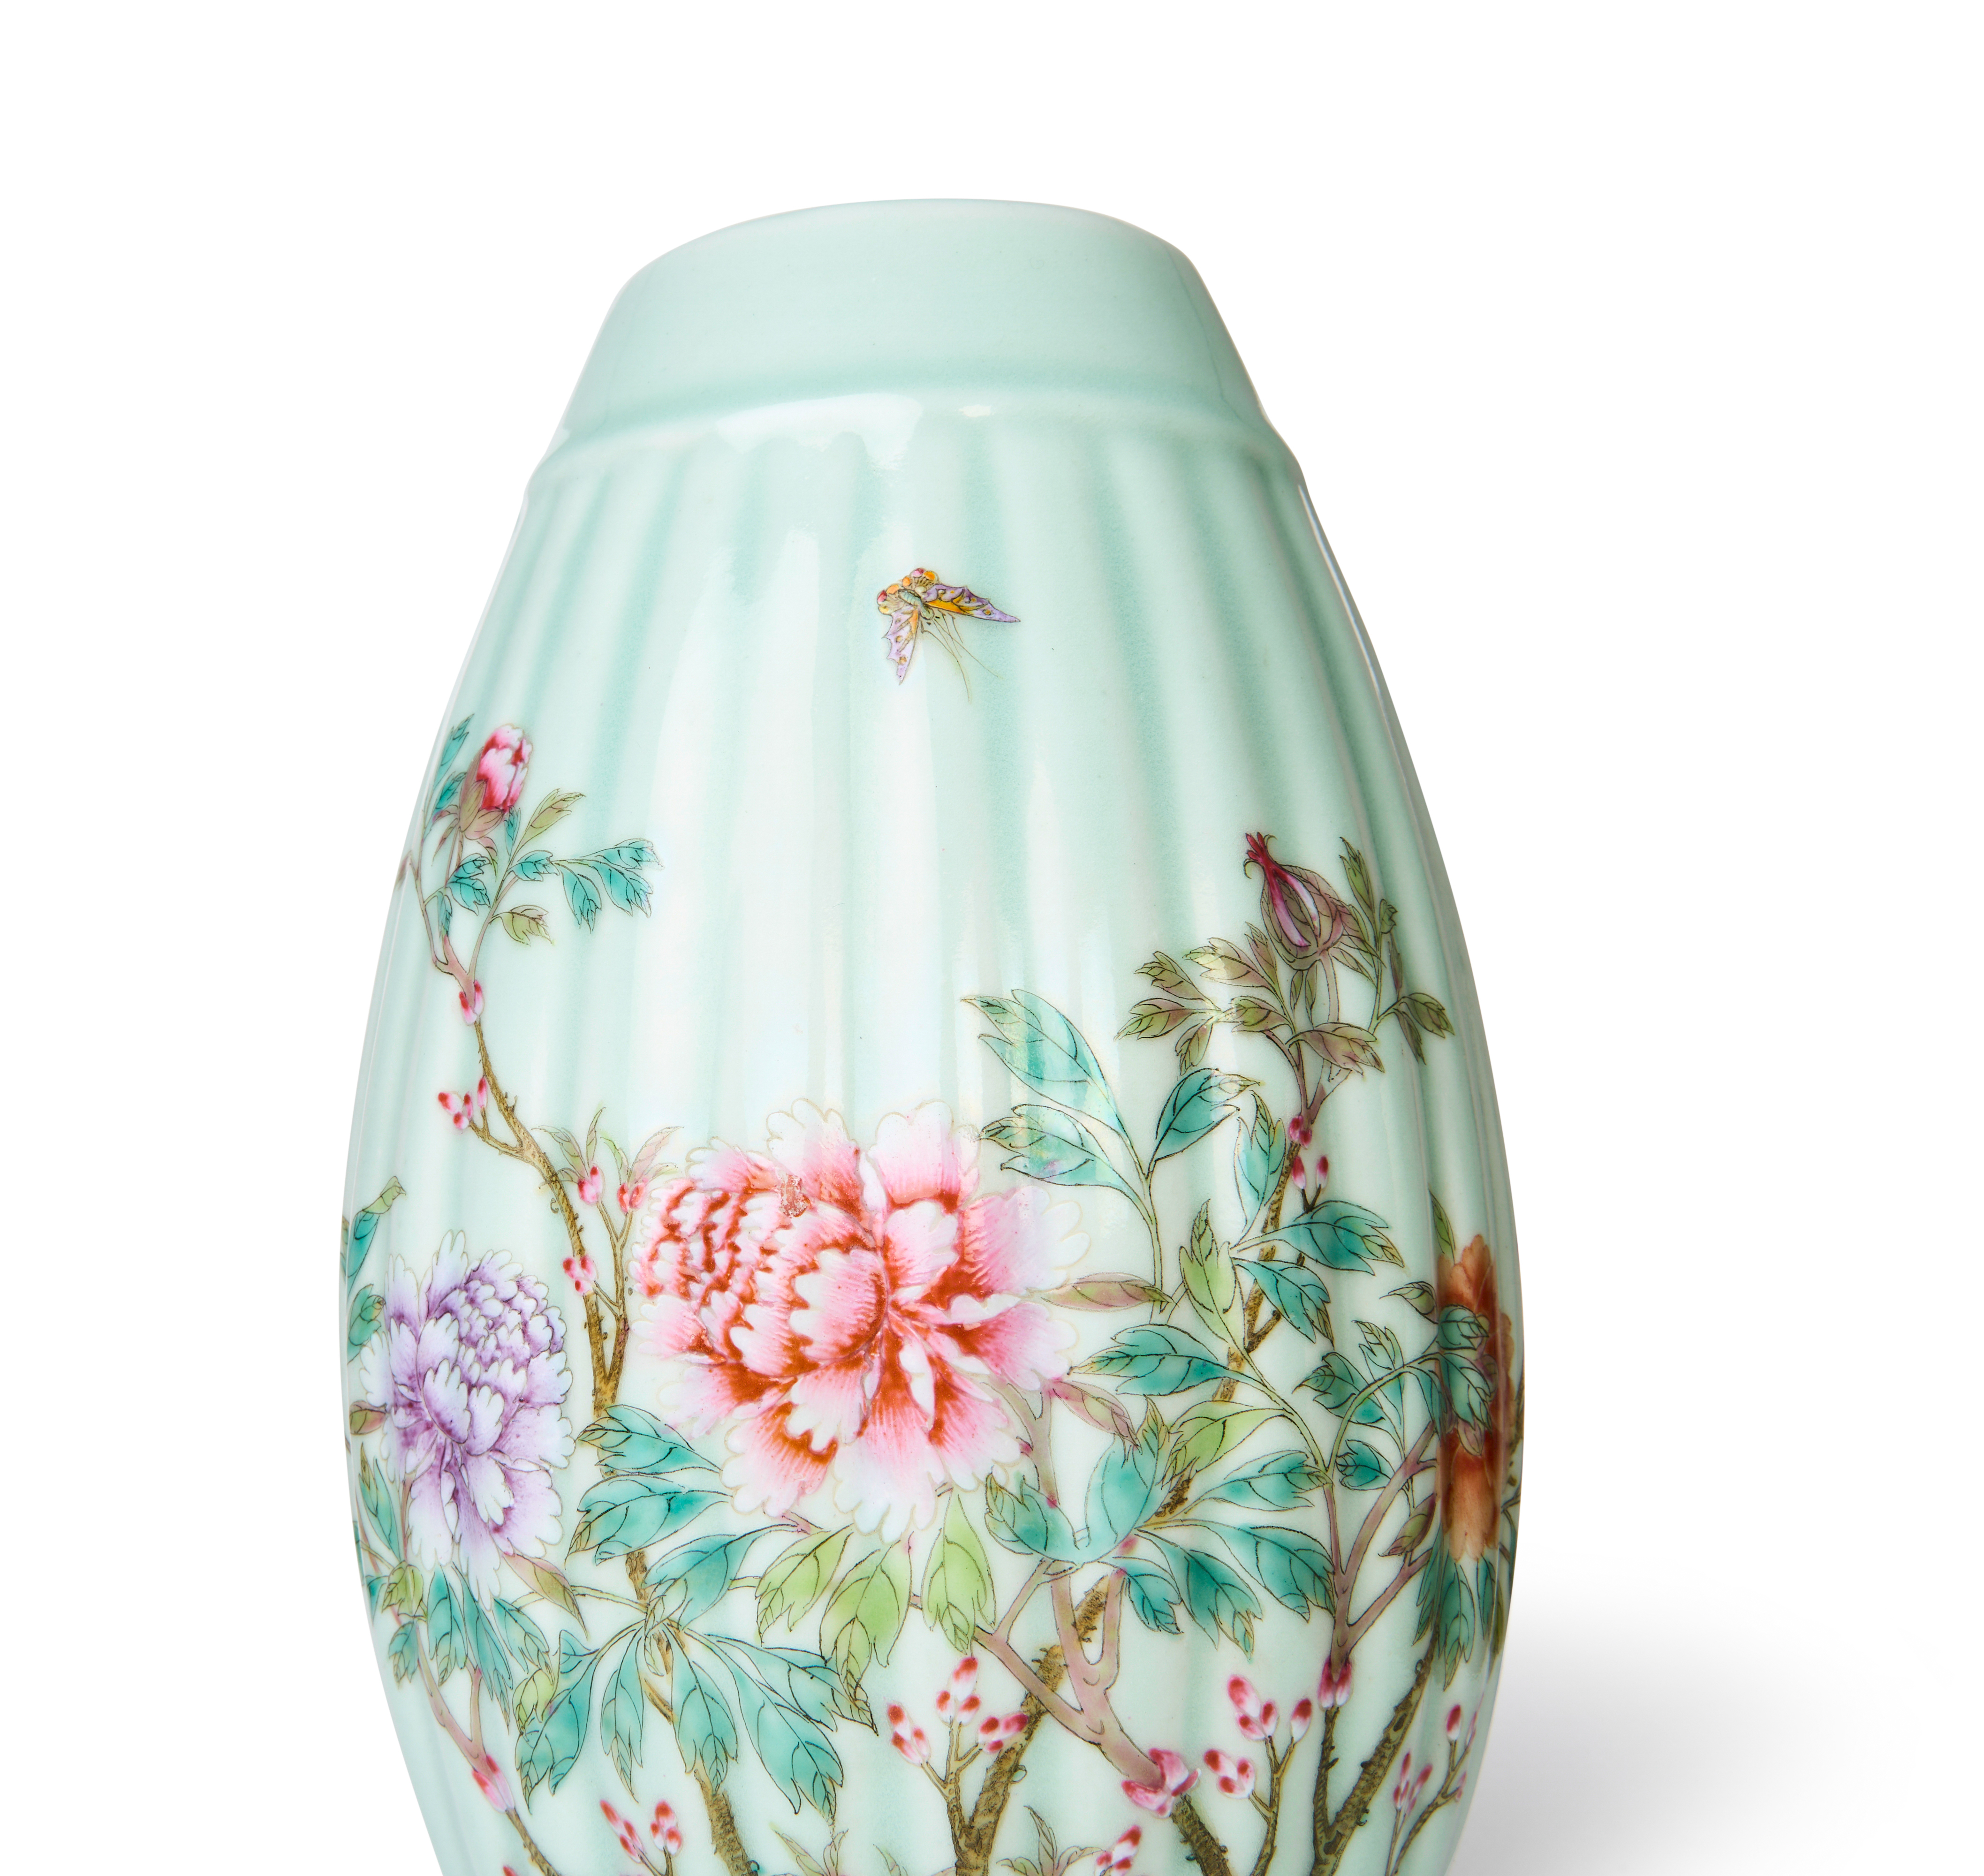 A RARE CHINESE FAMILLE ROSE LANTERN SHAPED VASE, QIANLONG MARK & POSSIBLY OF THE PERIOD - Image 2 of 5